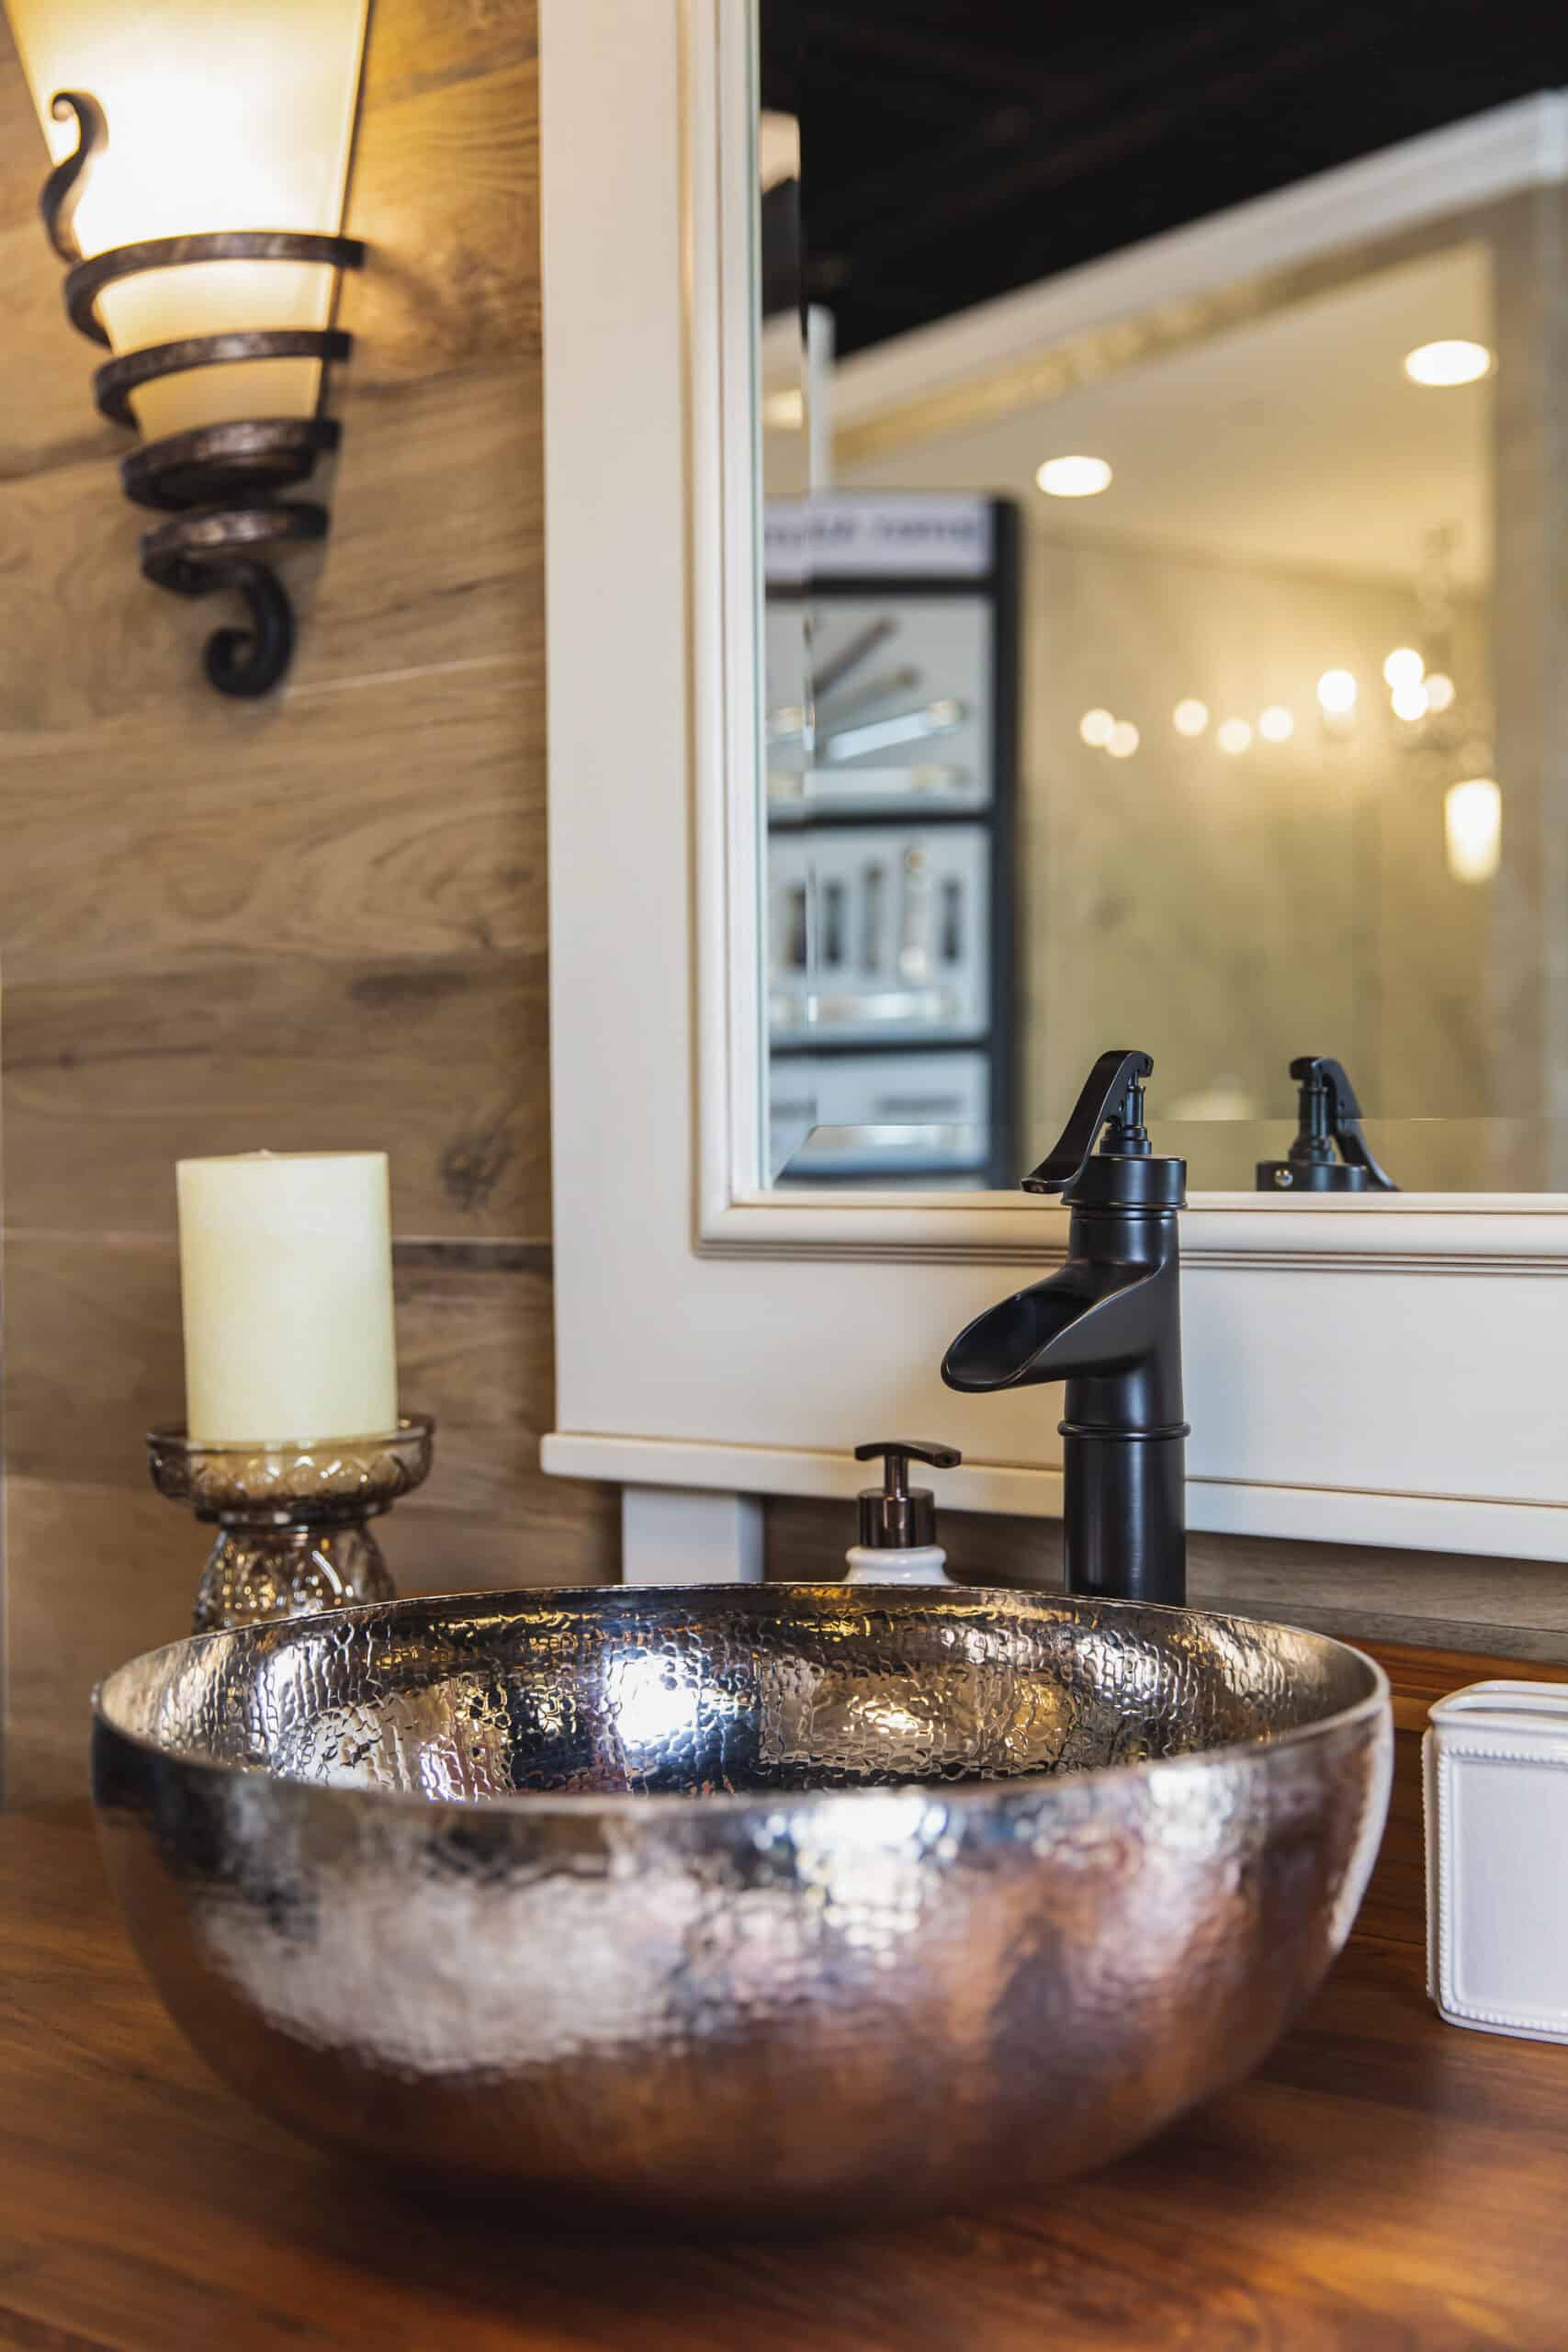 A bathroom sink with a mirror and wooden counter